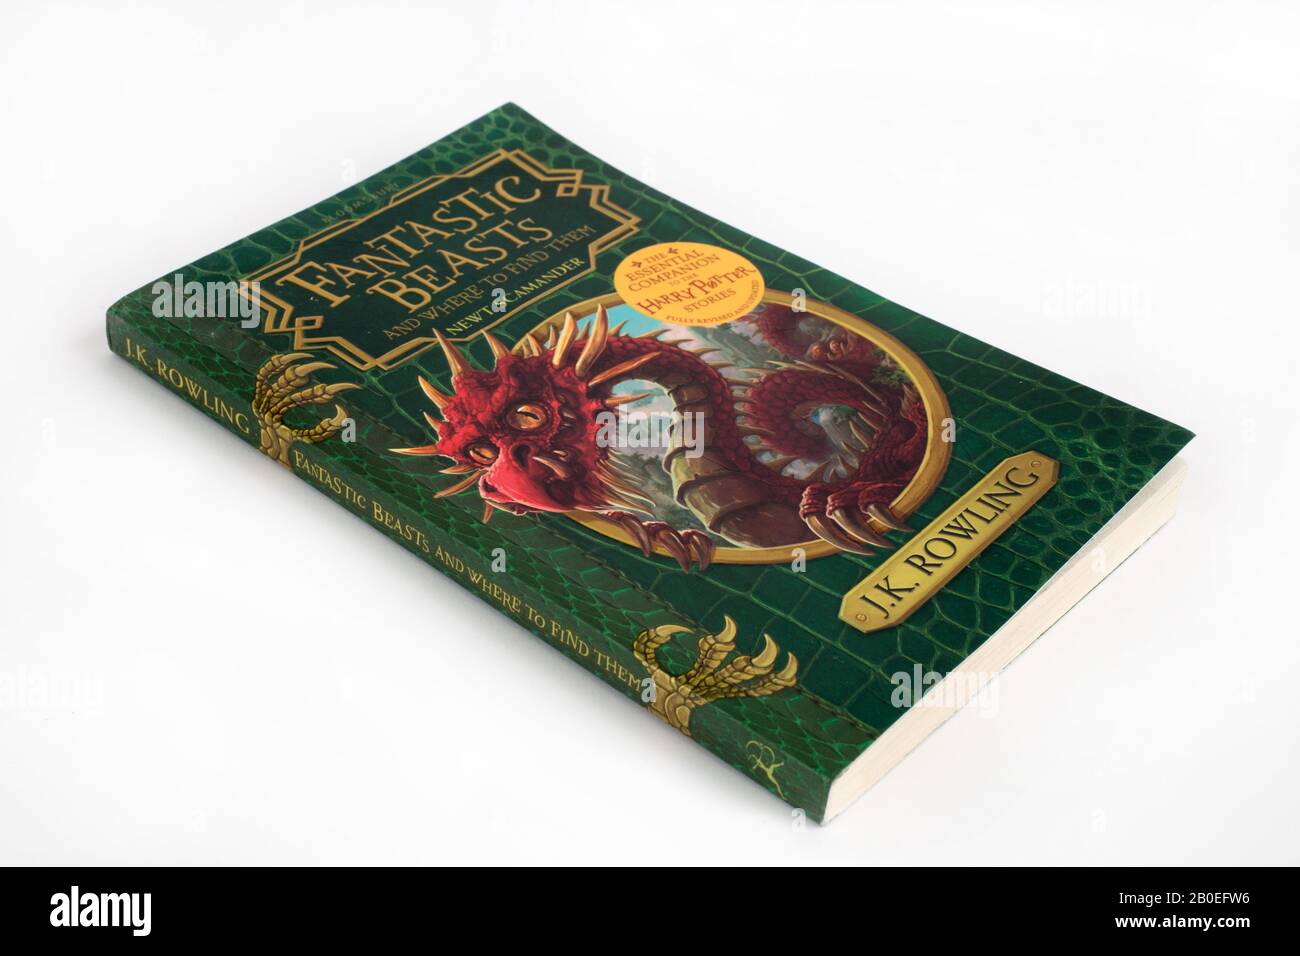 The book, Fantastic Beasts and where to find them by J K Rowling Stock Photo